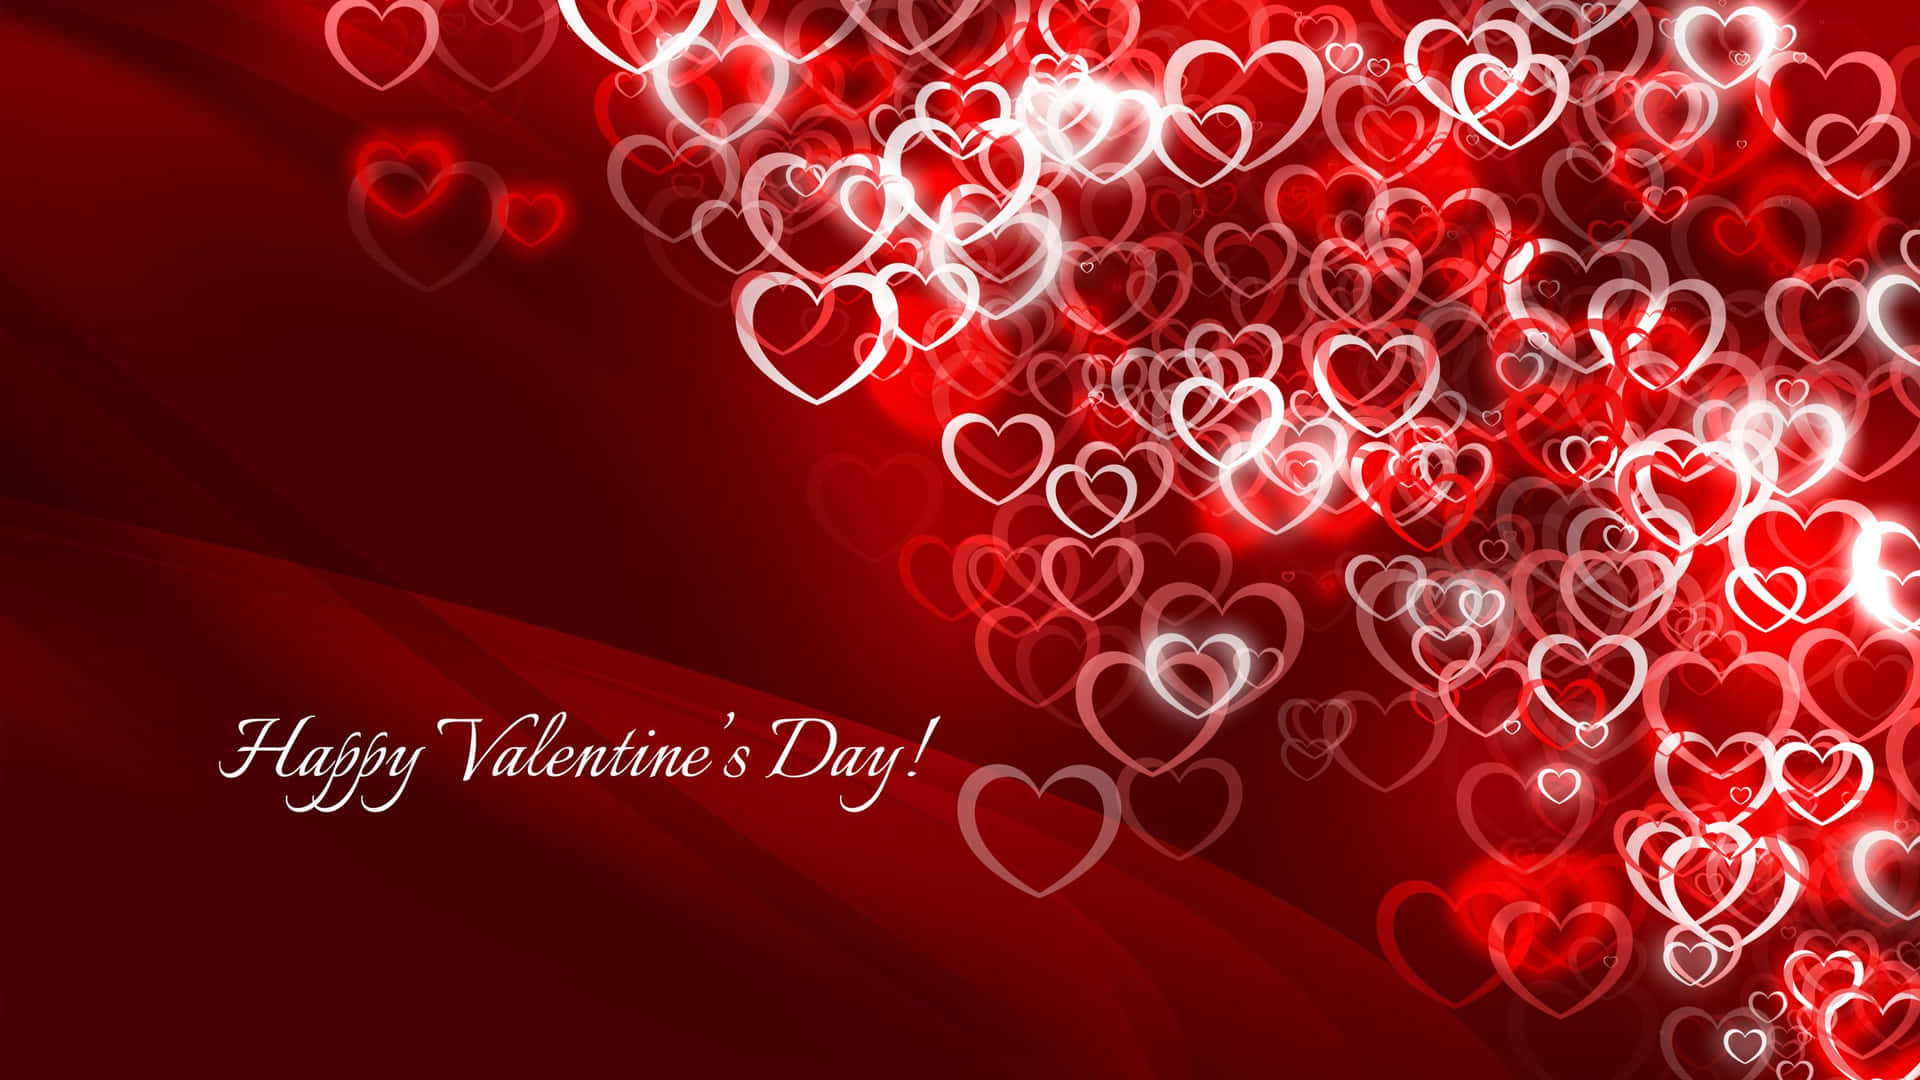 Celebrate Love and Make Happy Valentines Day Wallpaper